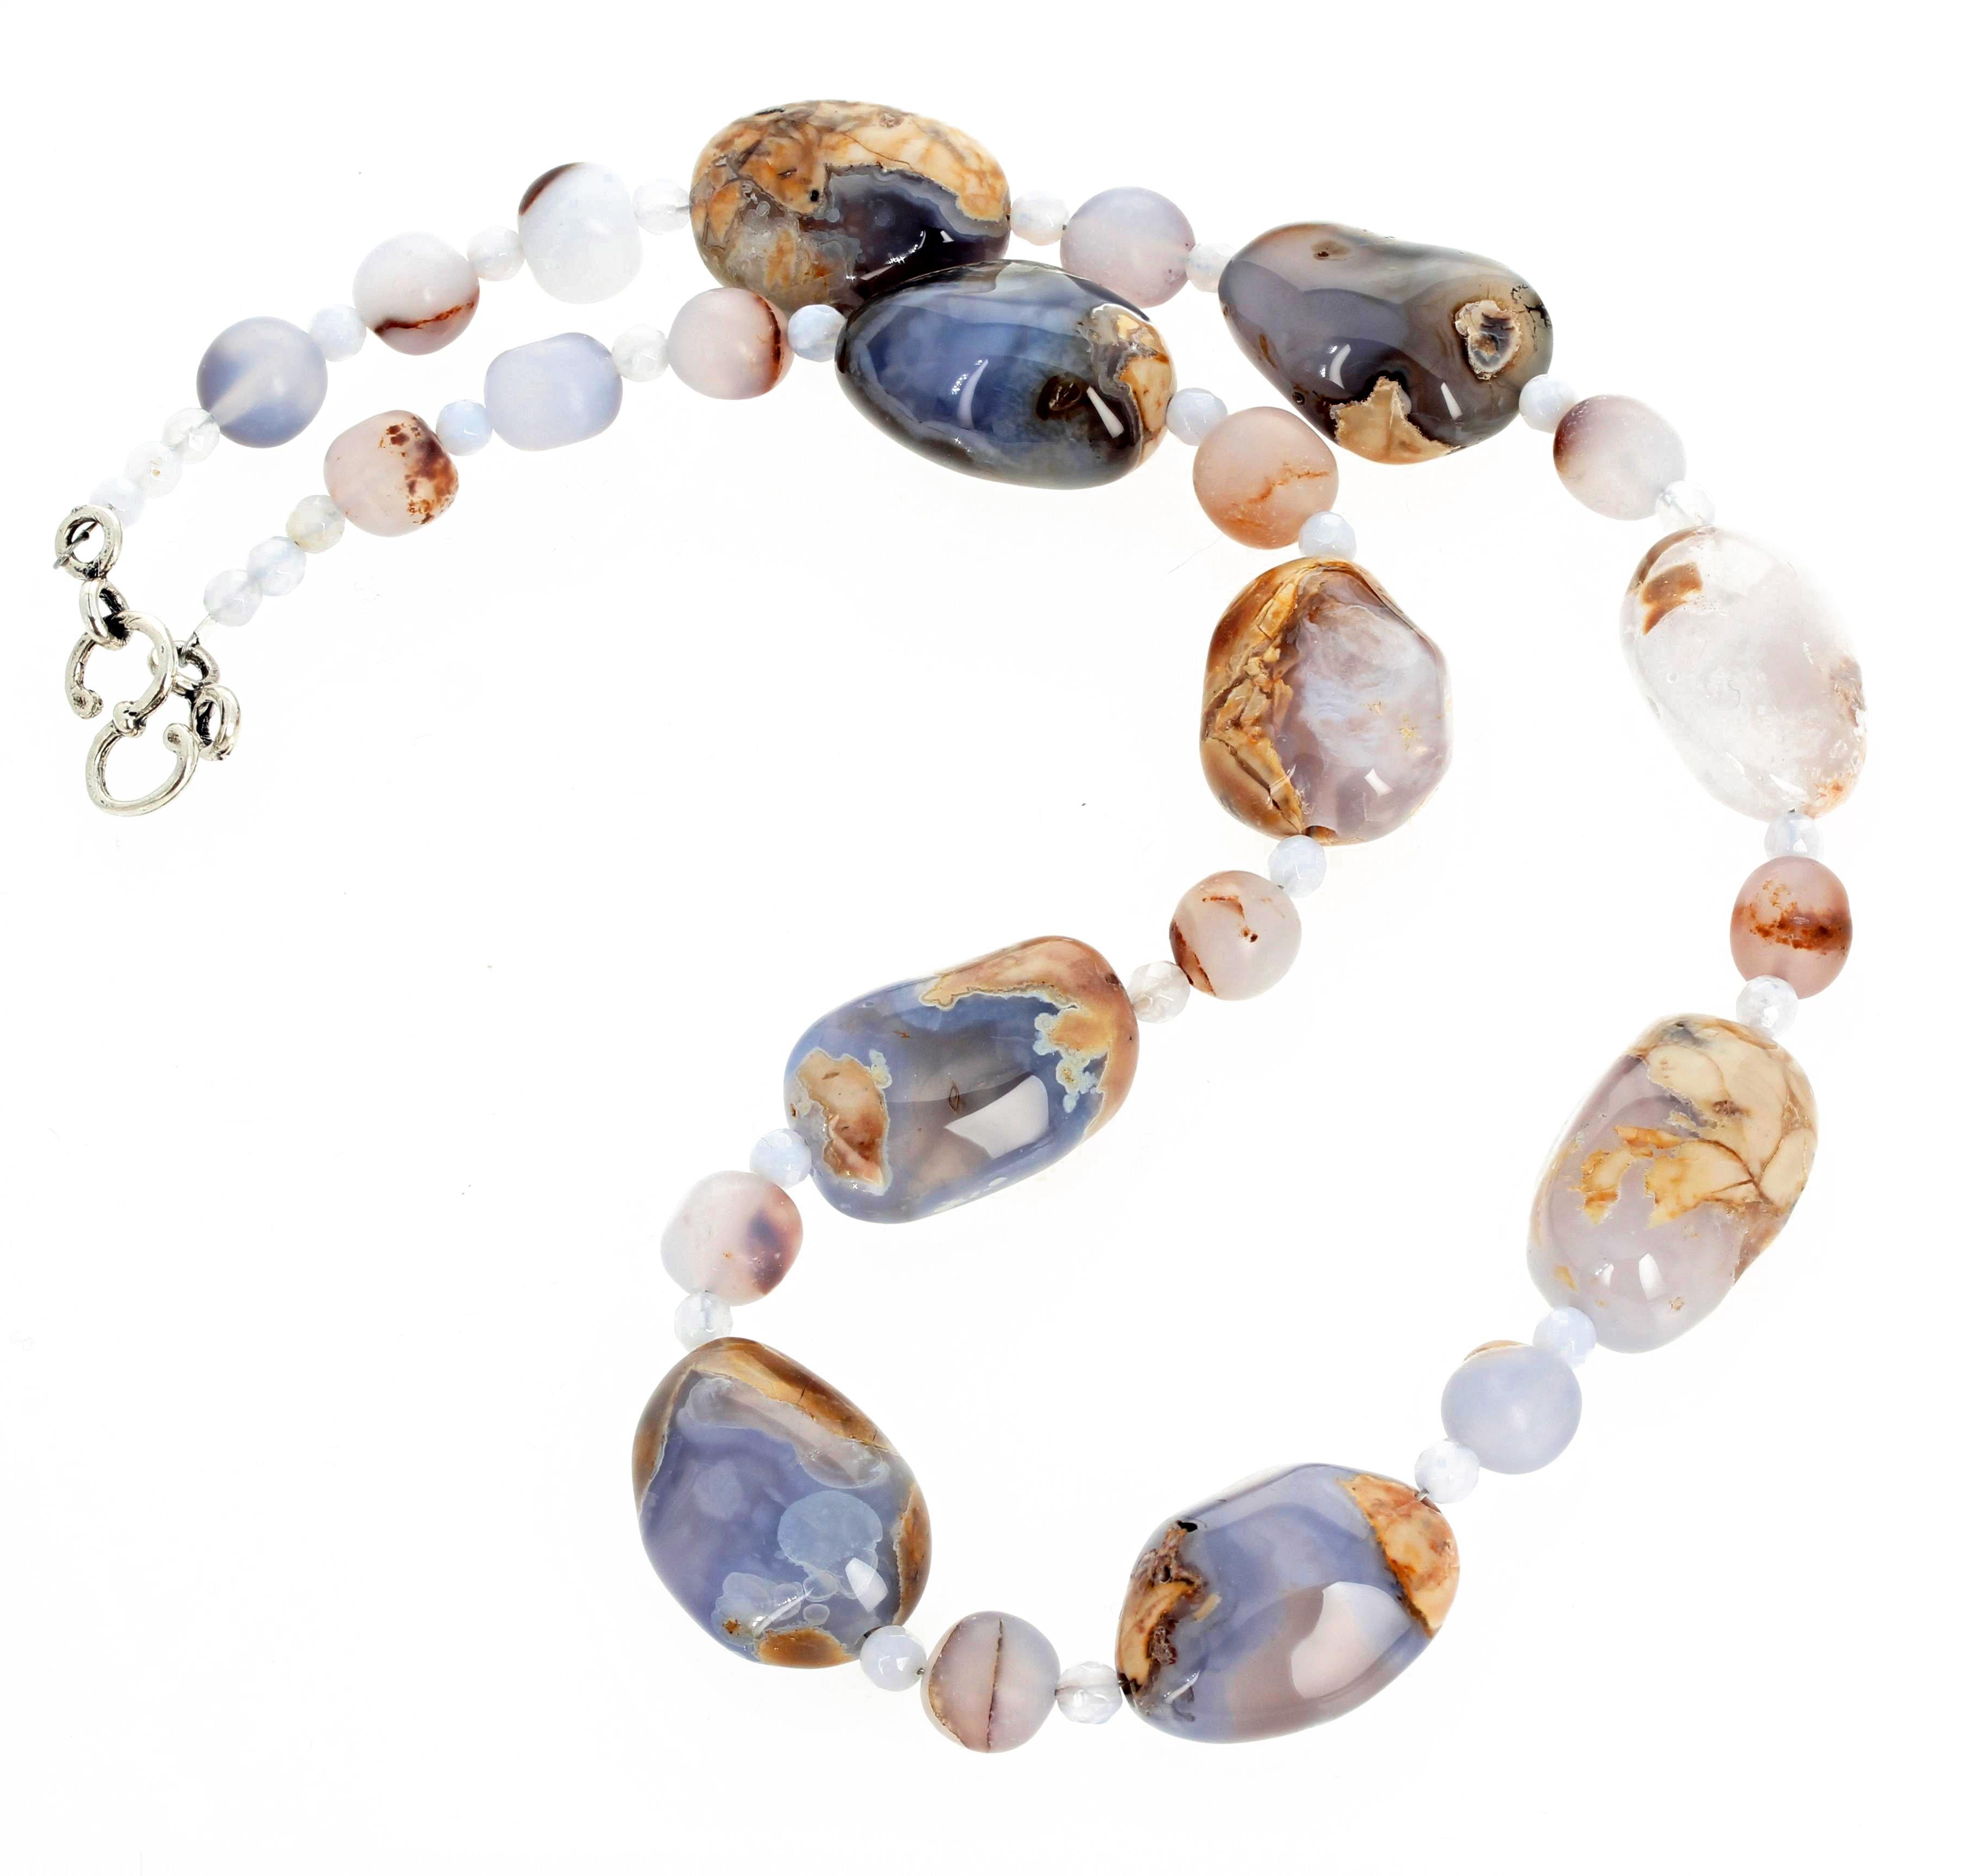 Polished chunks of natural Chalcedony (approximately 25mm x 18mm) - considered by some to be a healing gemstone -  enhanced with round polished Chalcedony gems and sparkling highly polished checkerboard gemcut Chalcedony.  This lovely necklace is 19